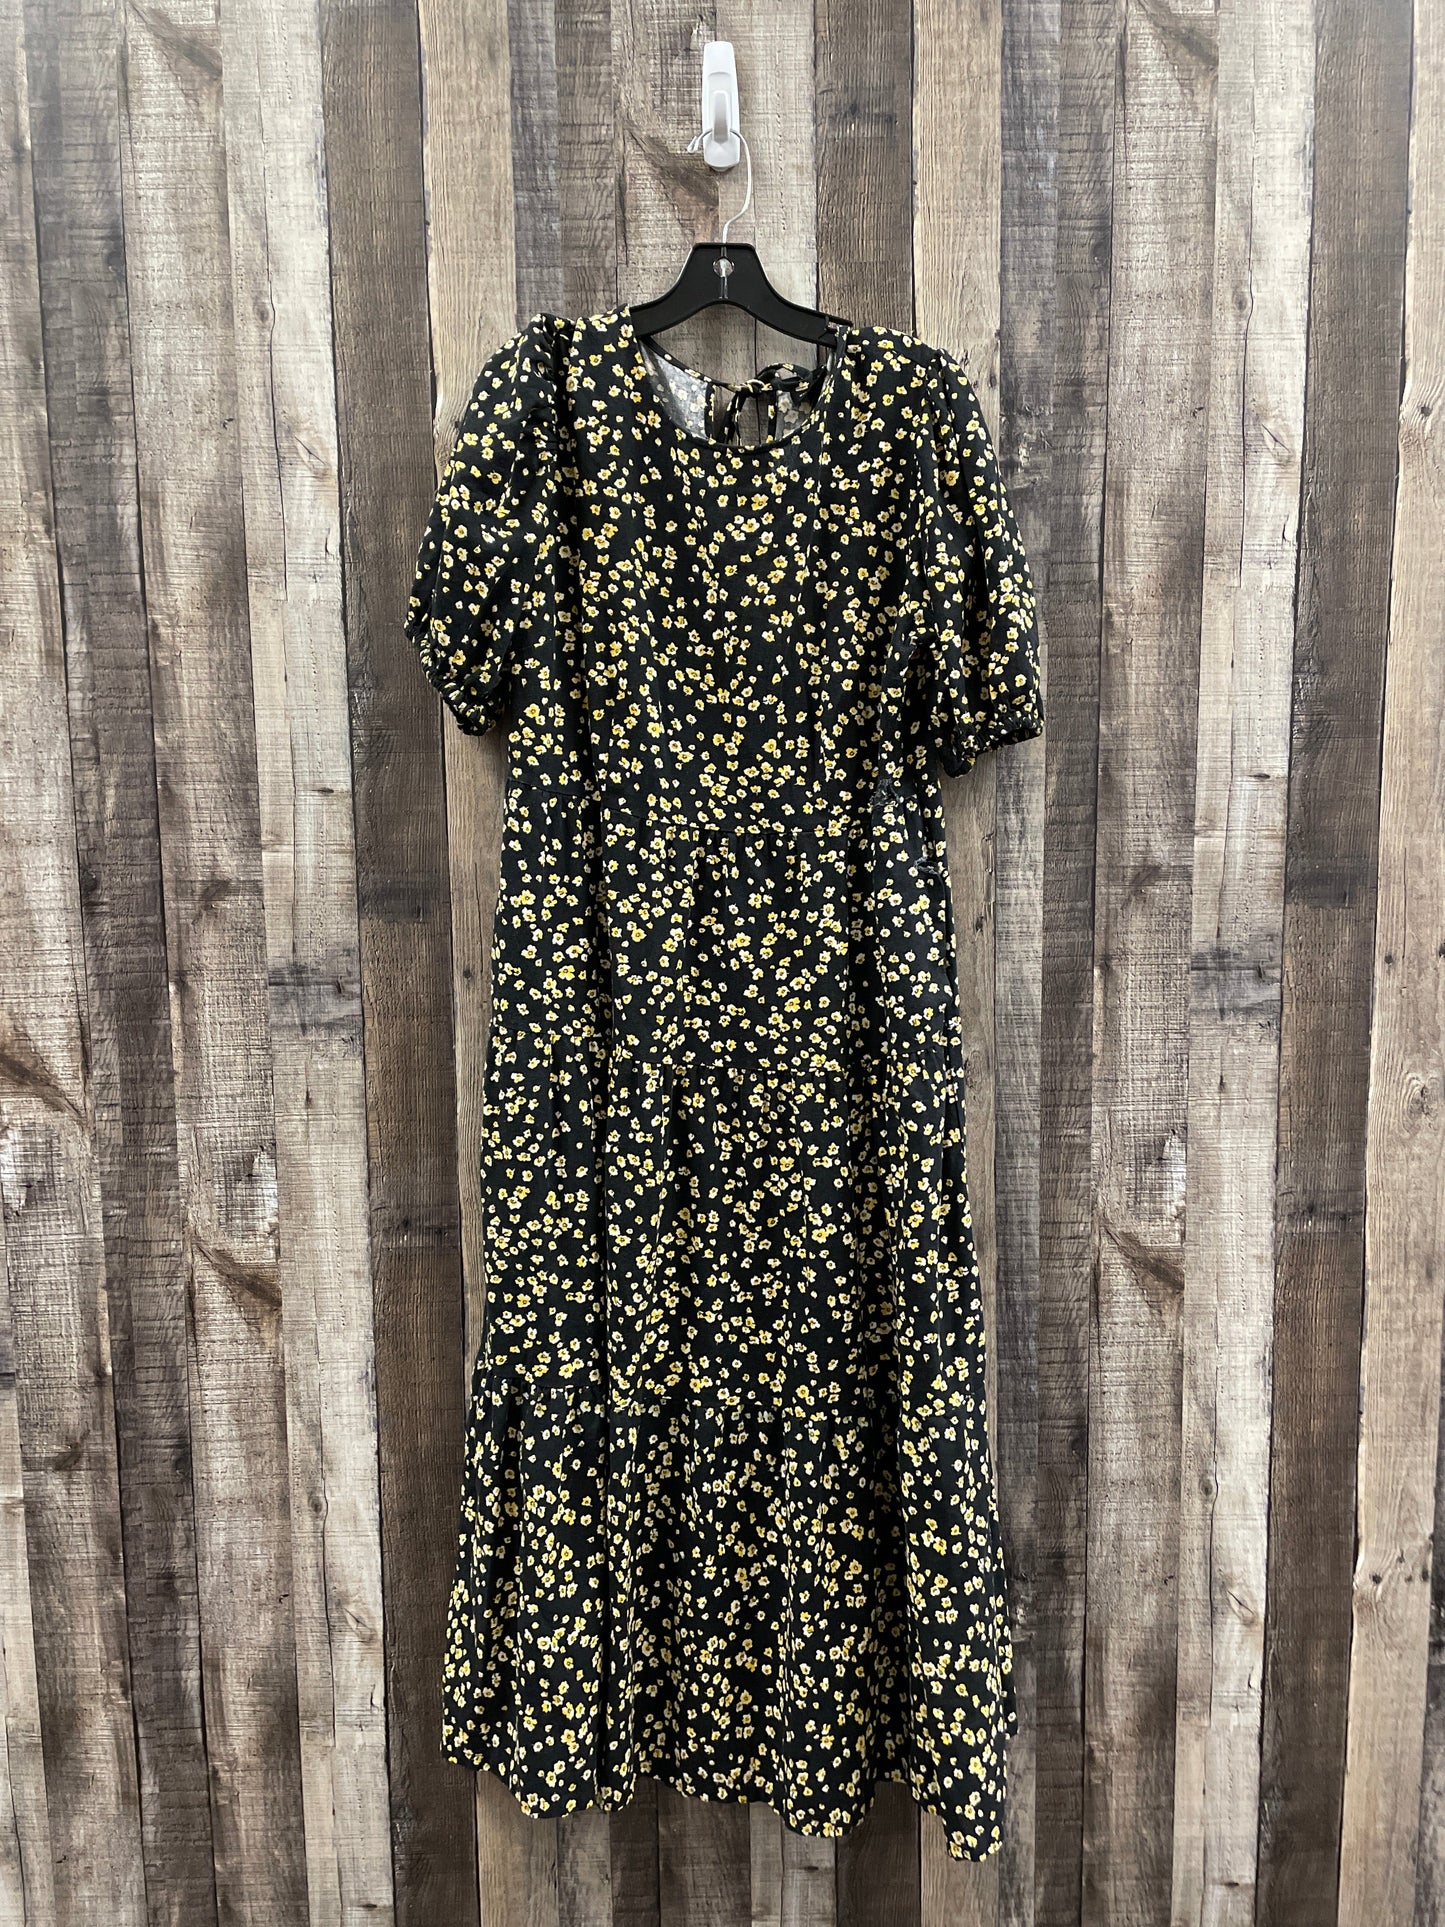 Black & Gold Dress Casual Maxi Who What Wear, Size L